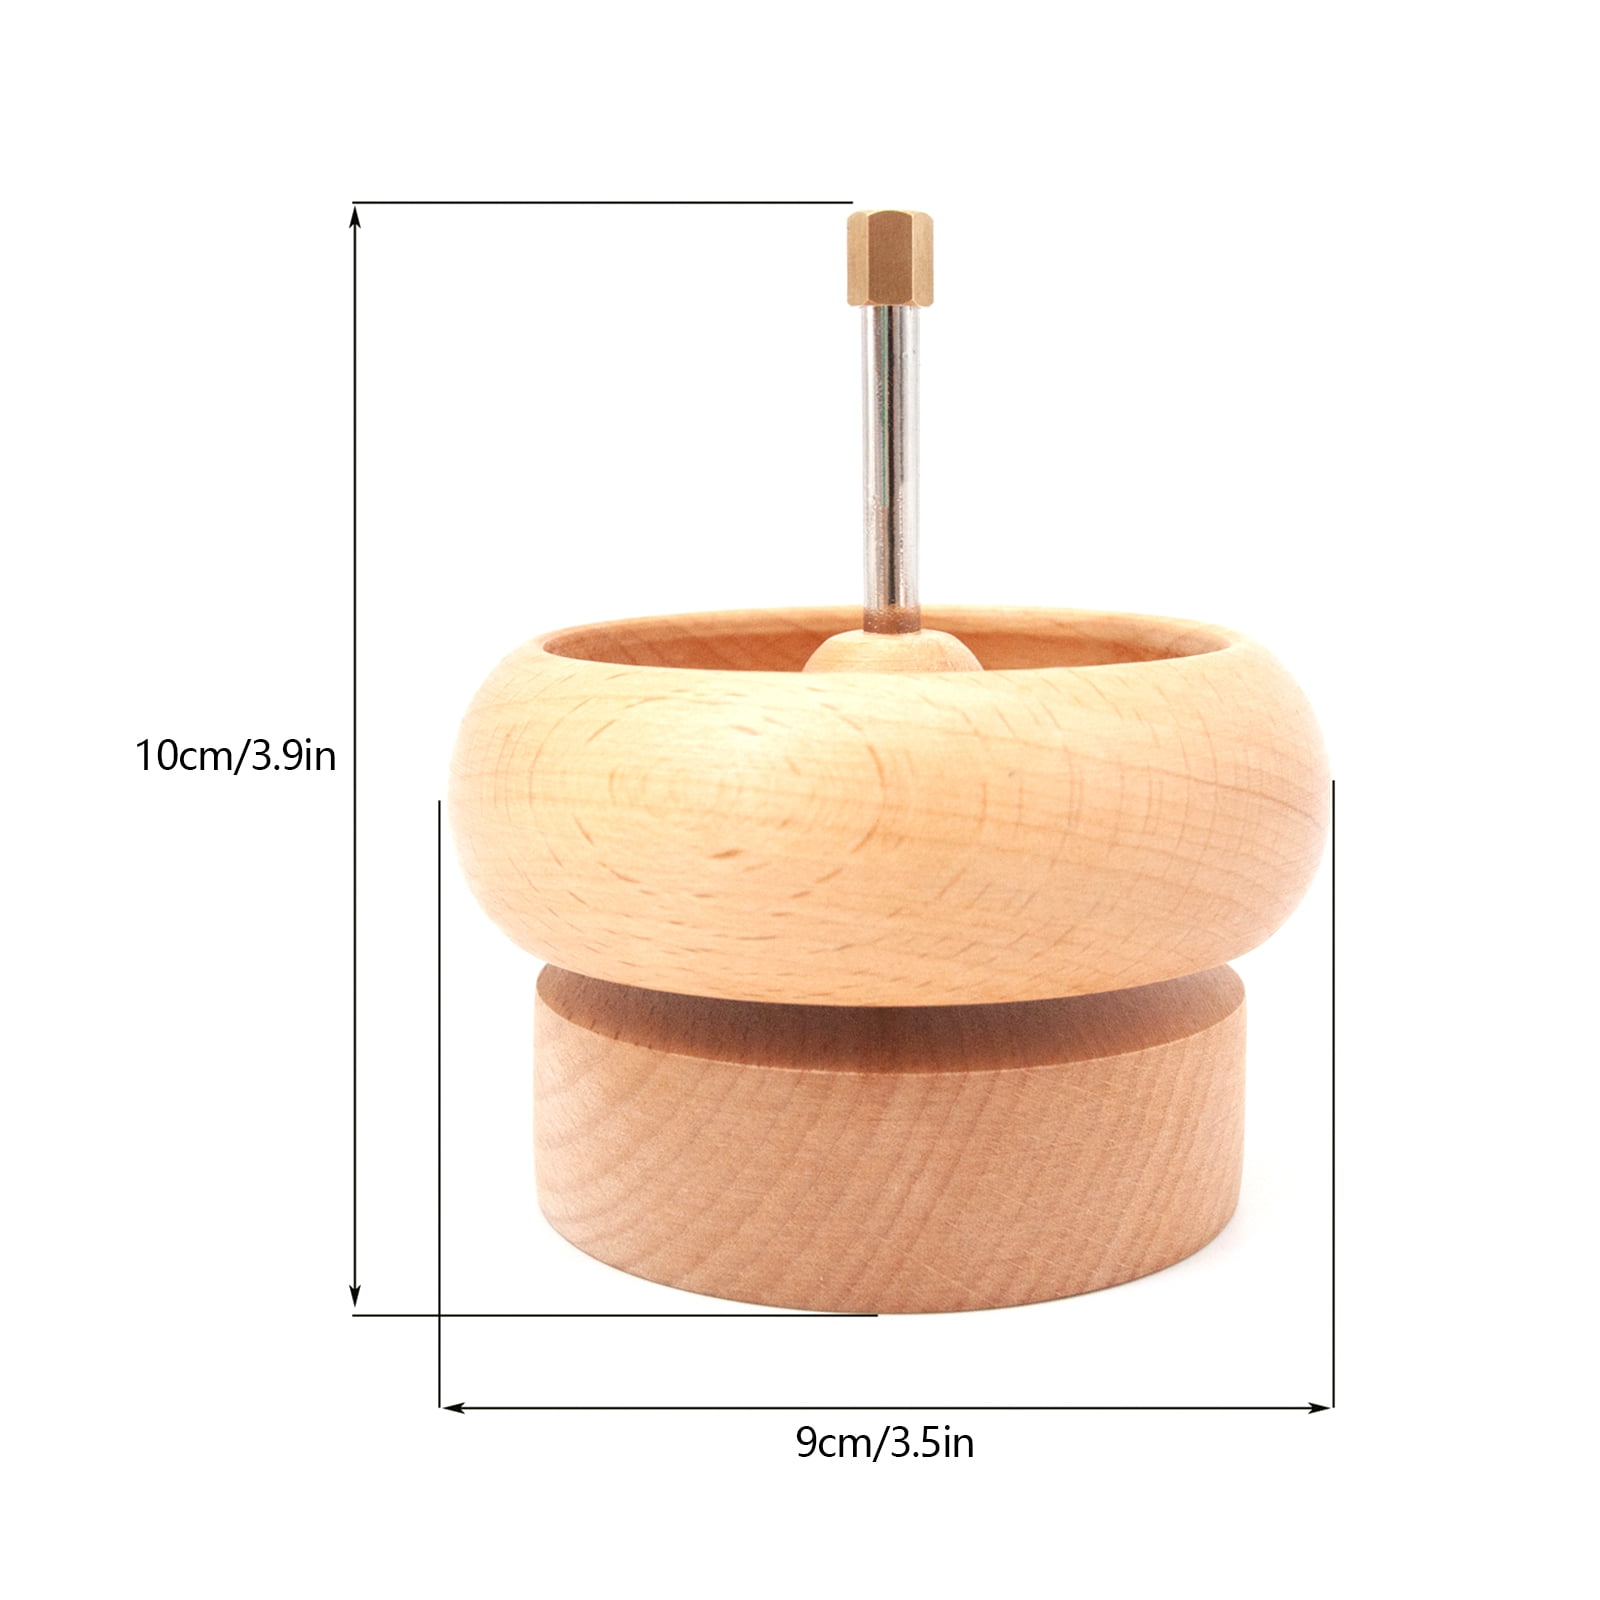 3pcs/set Wooden Manual Seed Bead Spinner Holder Speedy Bead Loader with  2pcs Iron Curved Beading Needle for Stringing Beads Quickly Burly Wood  Wooden DIY Tool